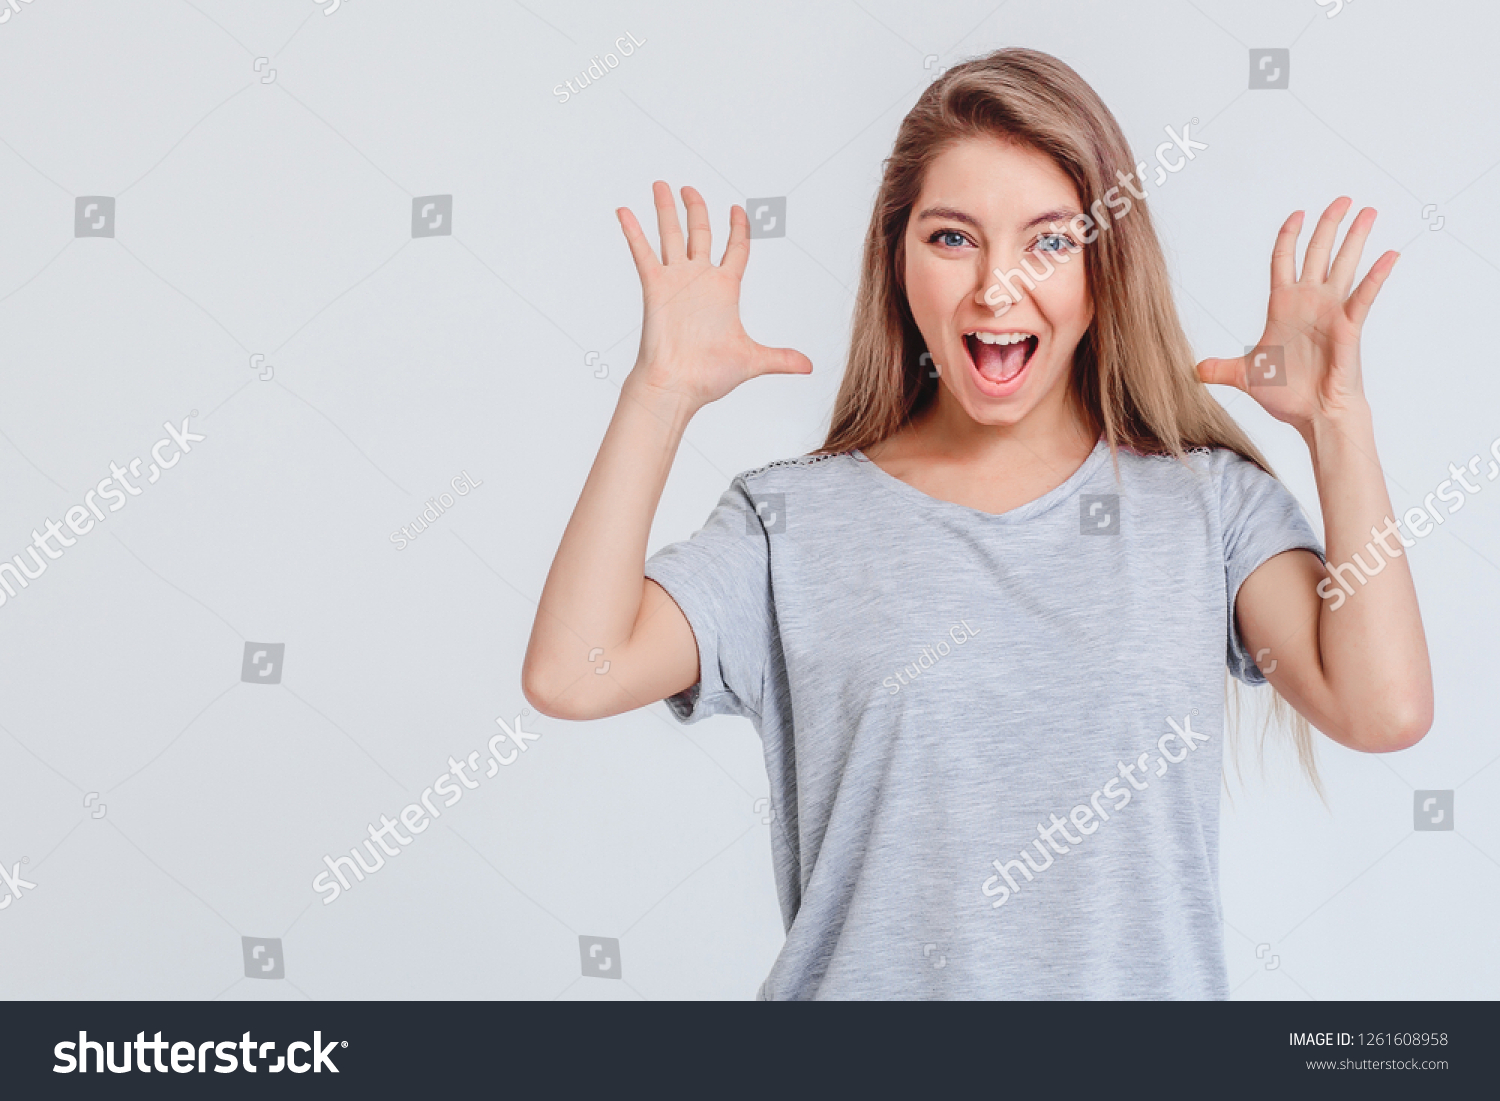 Surprised joyful girl on gray background in t-shirt looks with smile and holds hands with palm open at head. Concept of surprise solemnity surprise. Copy space left. Closeup. #1261608958